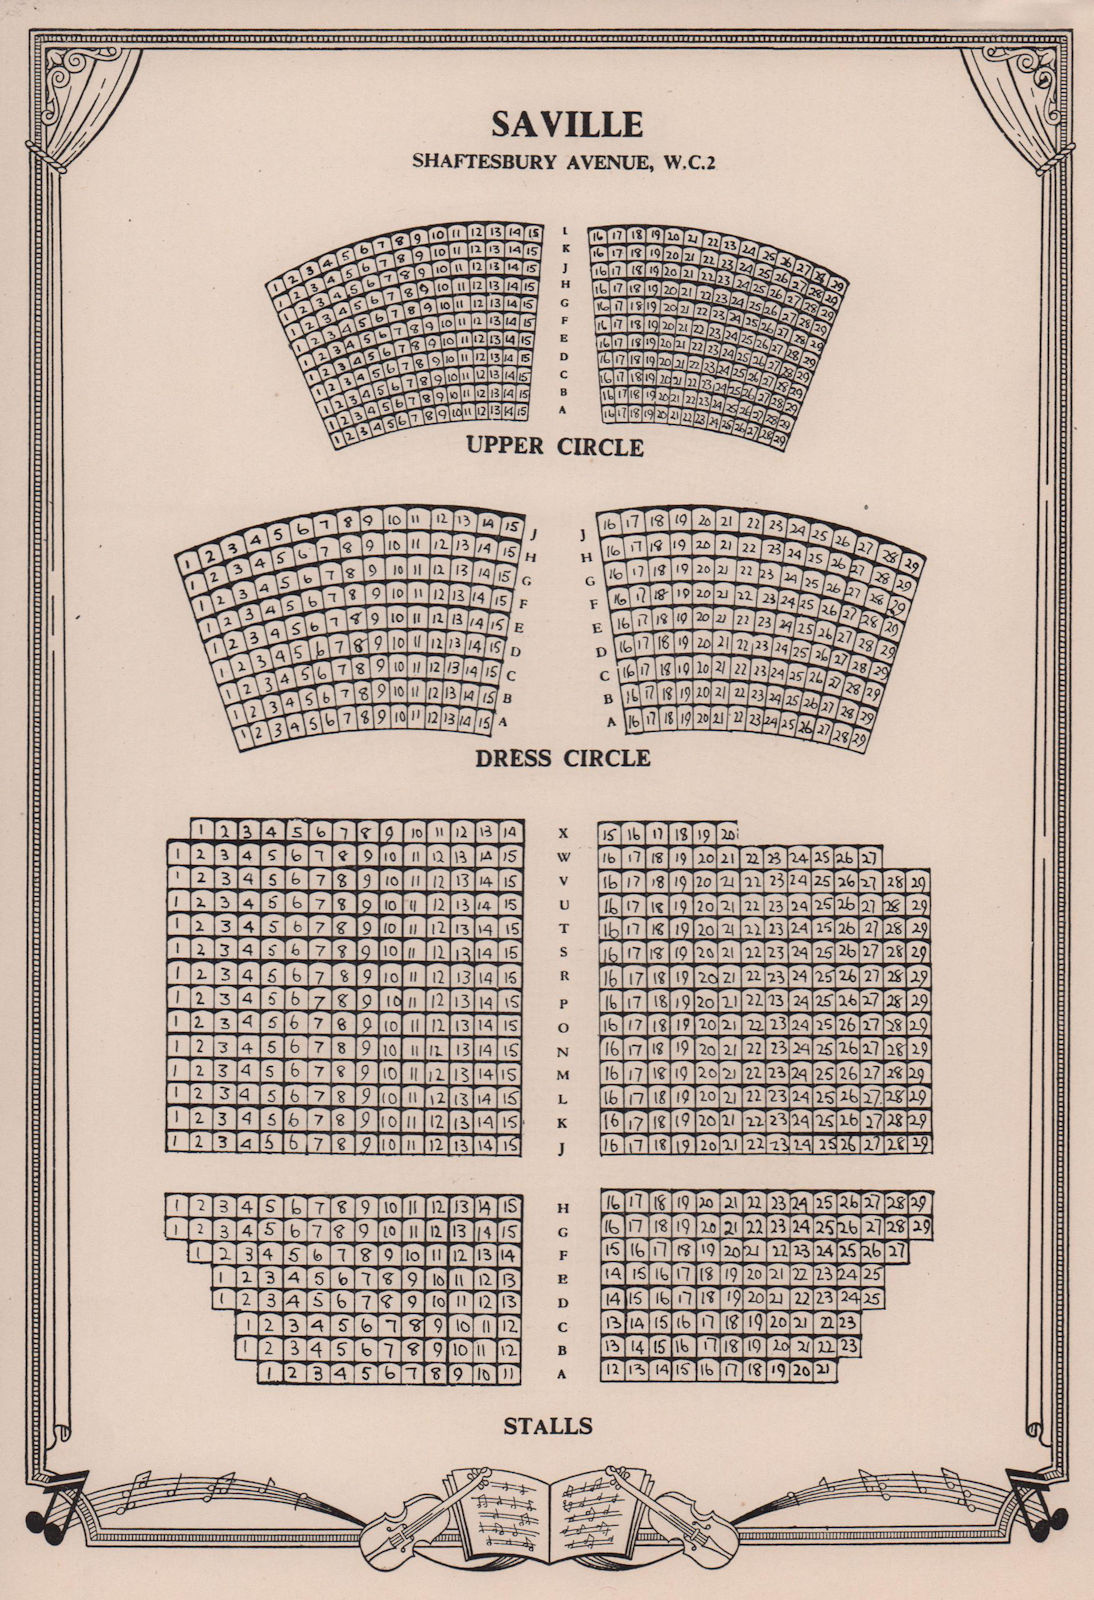 Associate Product Saville Theatre, Shaftesbury Ave Odeon Covent Garden. Vintage seating plan 1955